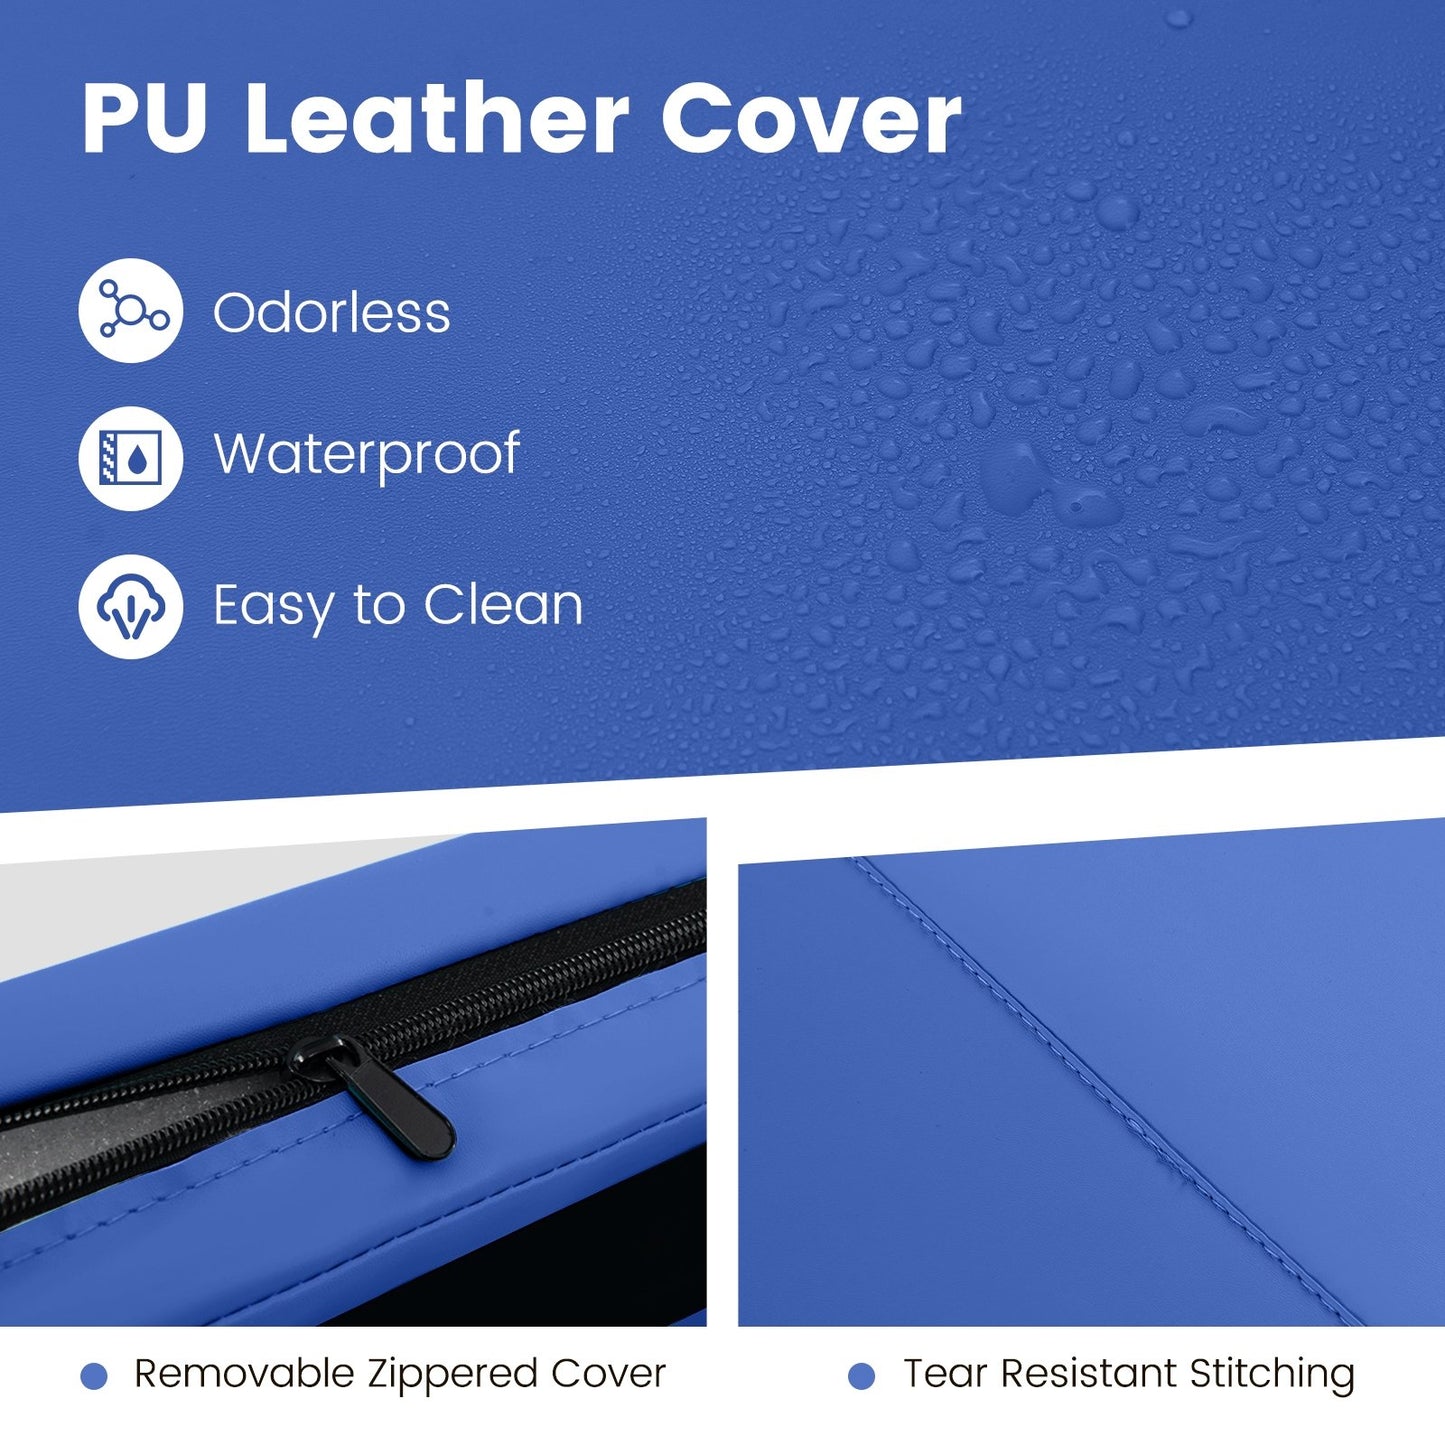 4-Panel PU Leather Folding Exercise Mat with Carrying Handles, Navy